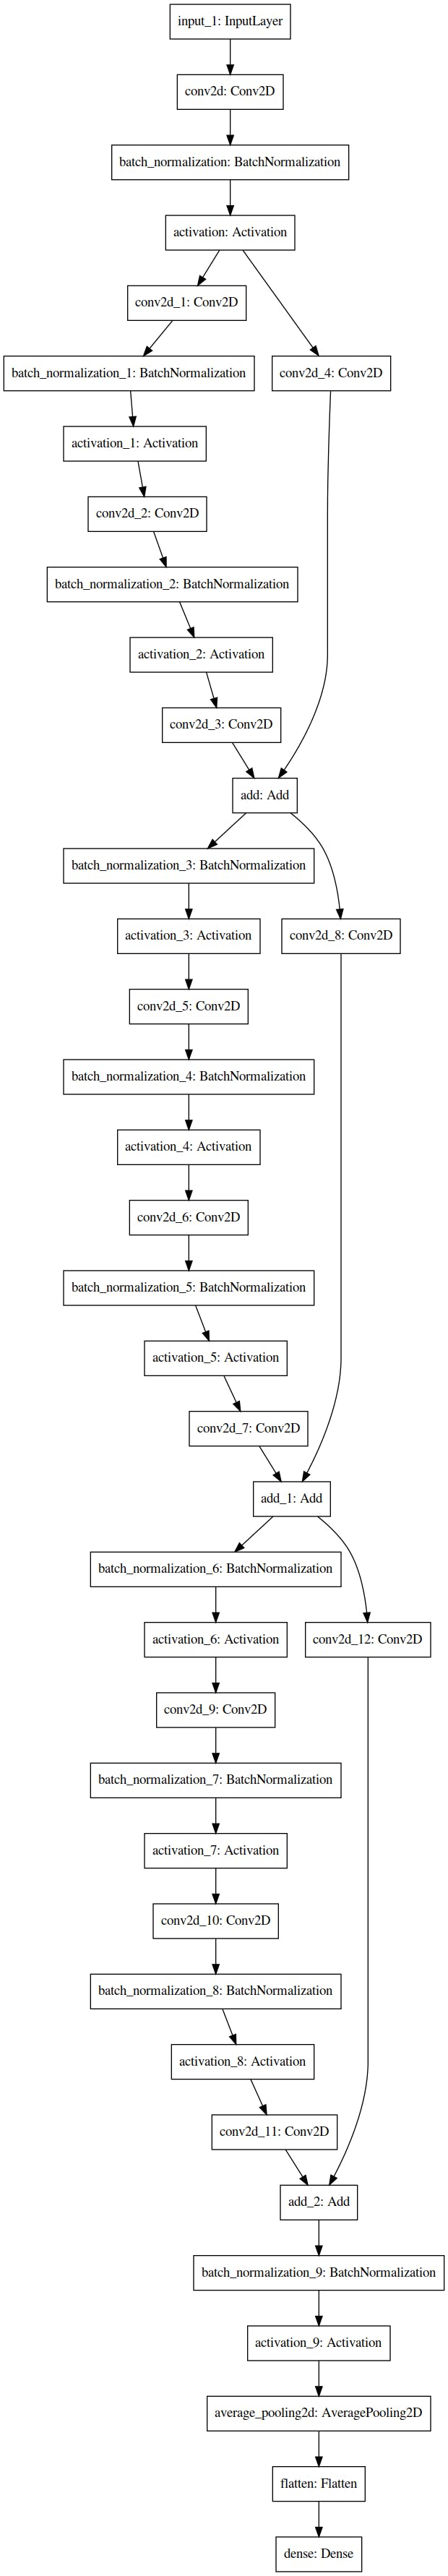 Sample Model architecture with depth 11